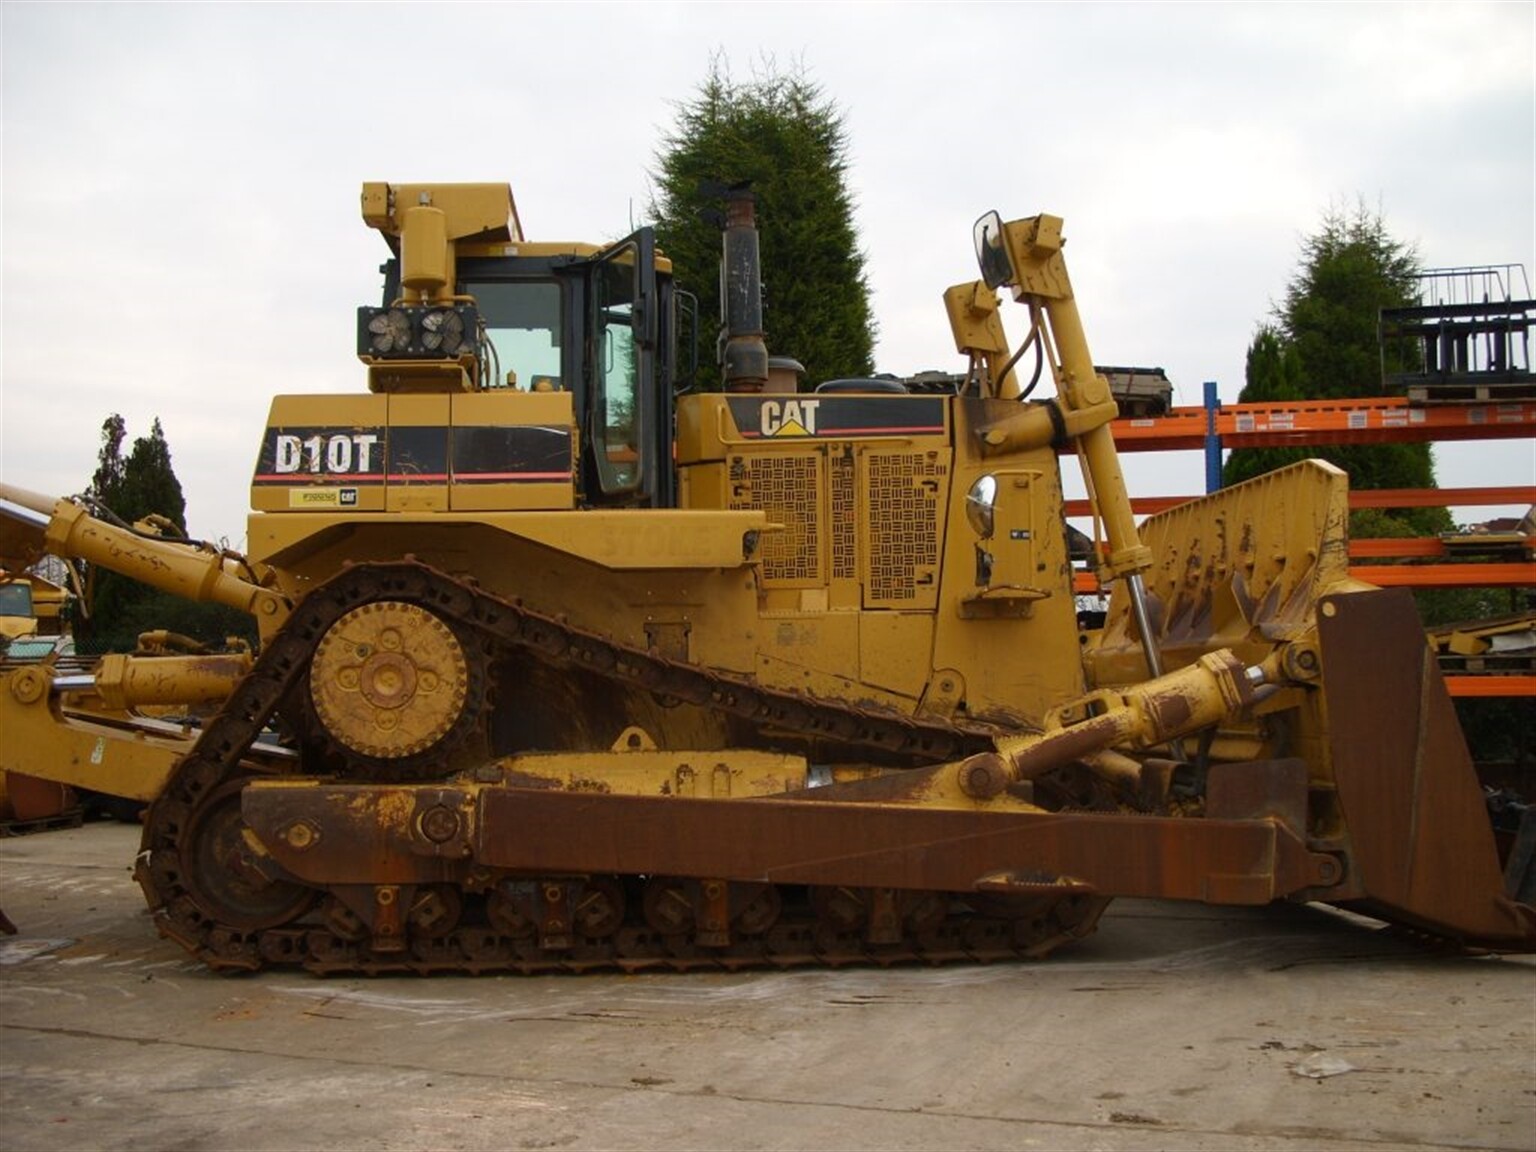 Ron Horner gets Hands On with a Cat D10